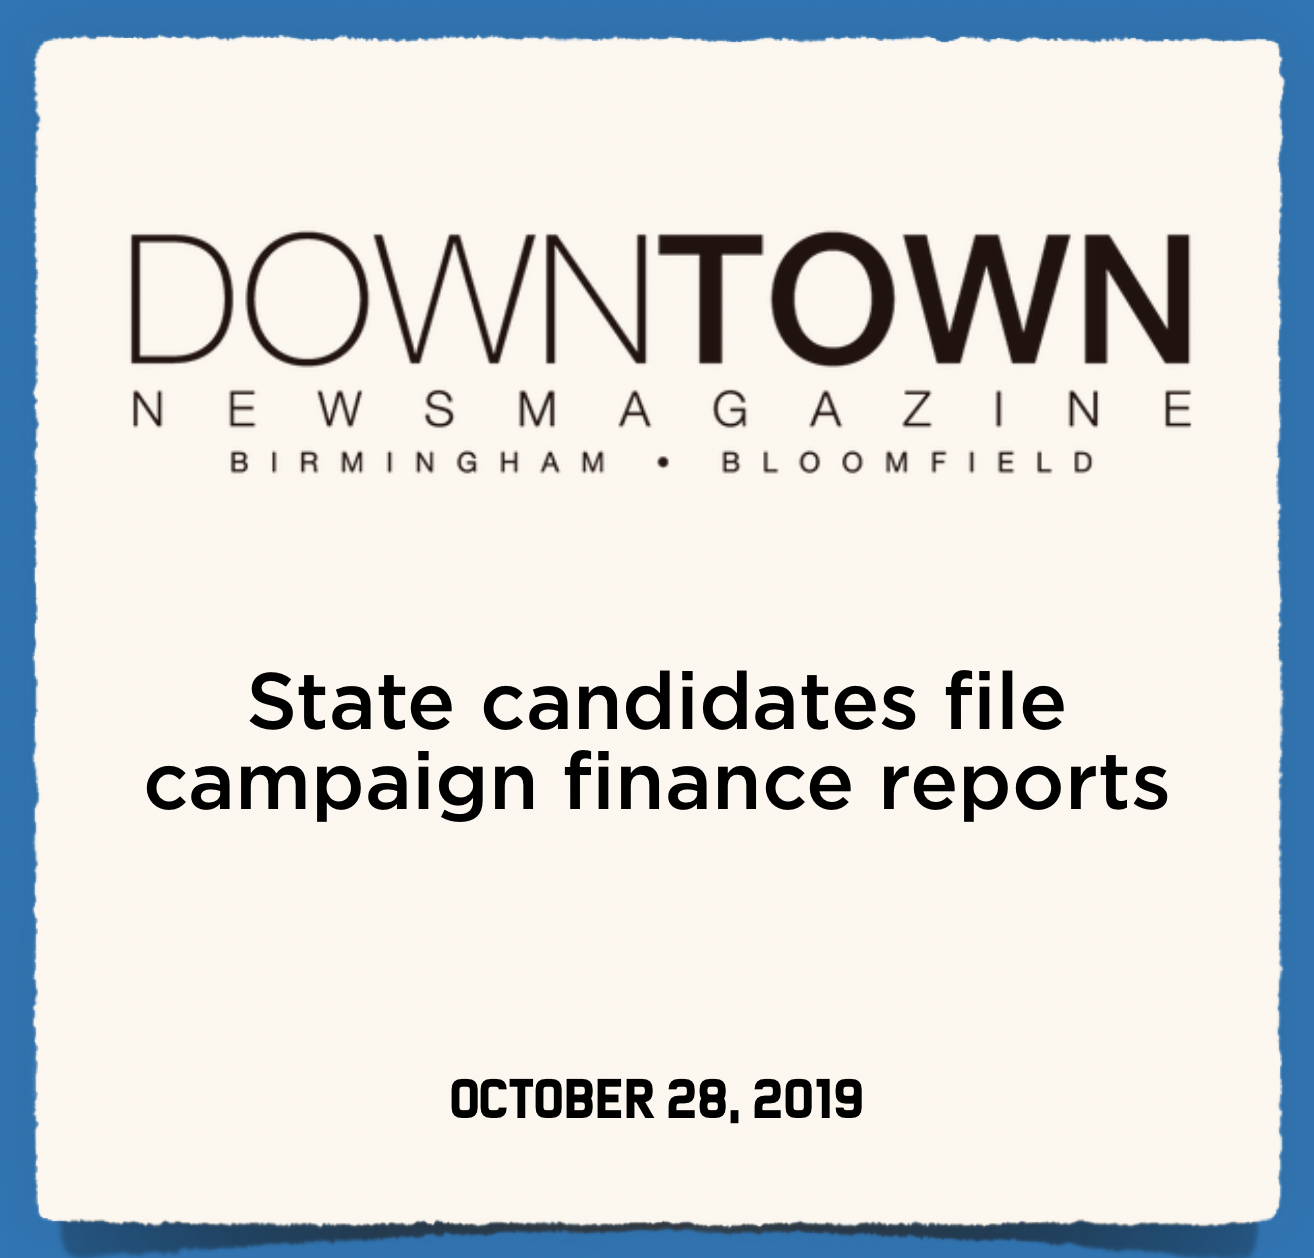 Downtown News Magazine: State candidates file campaign finance reports